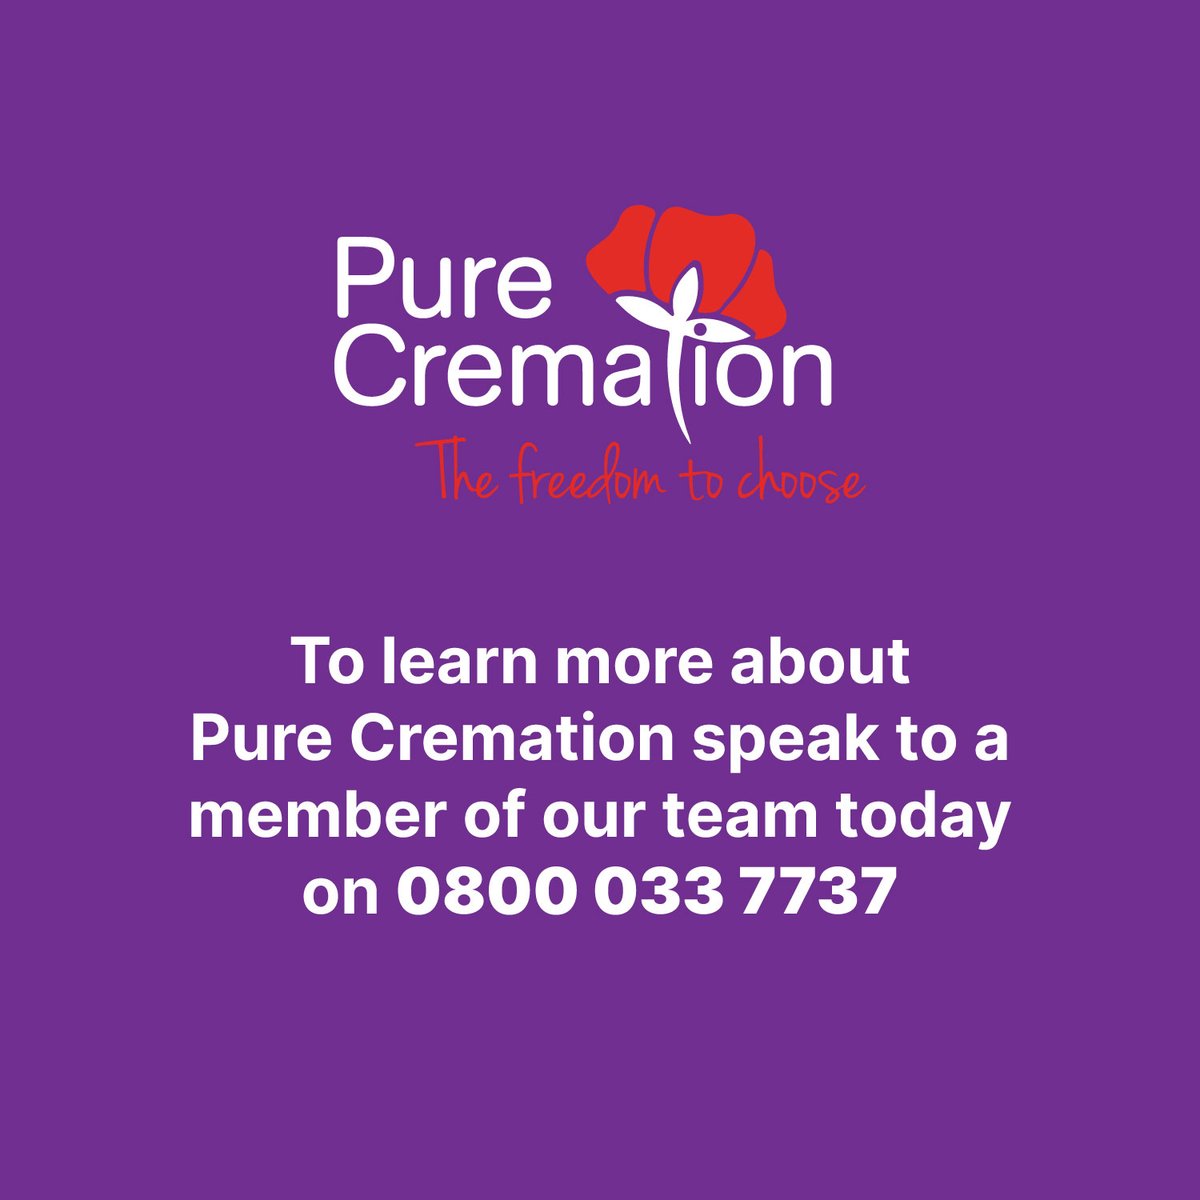 Let's debunk some common myths about Pure Cremation/ Direct Cremation and provide you with the facts you need to make an informed choice. purecremation.co.uk/blog/myth-bust… #MythBusting #DirectCremation #PureCremation